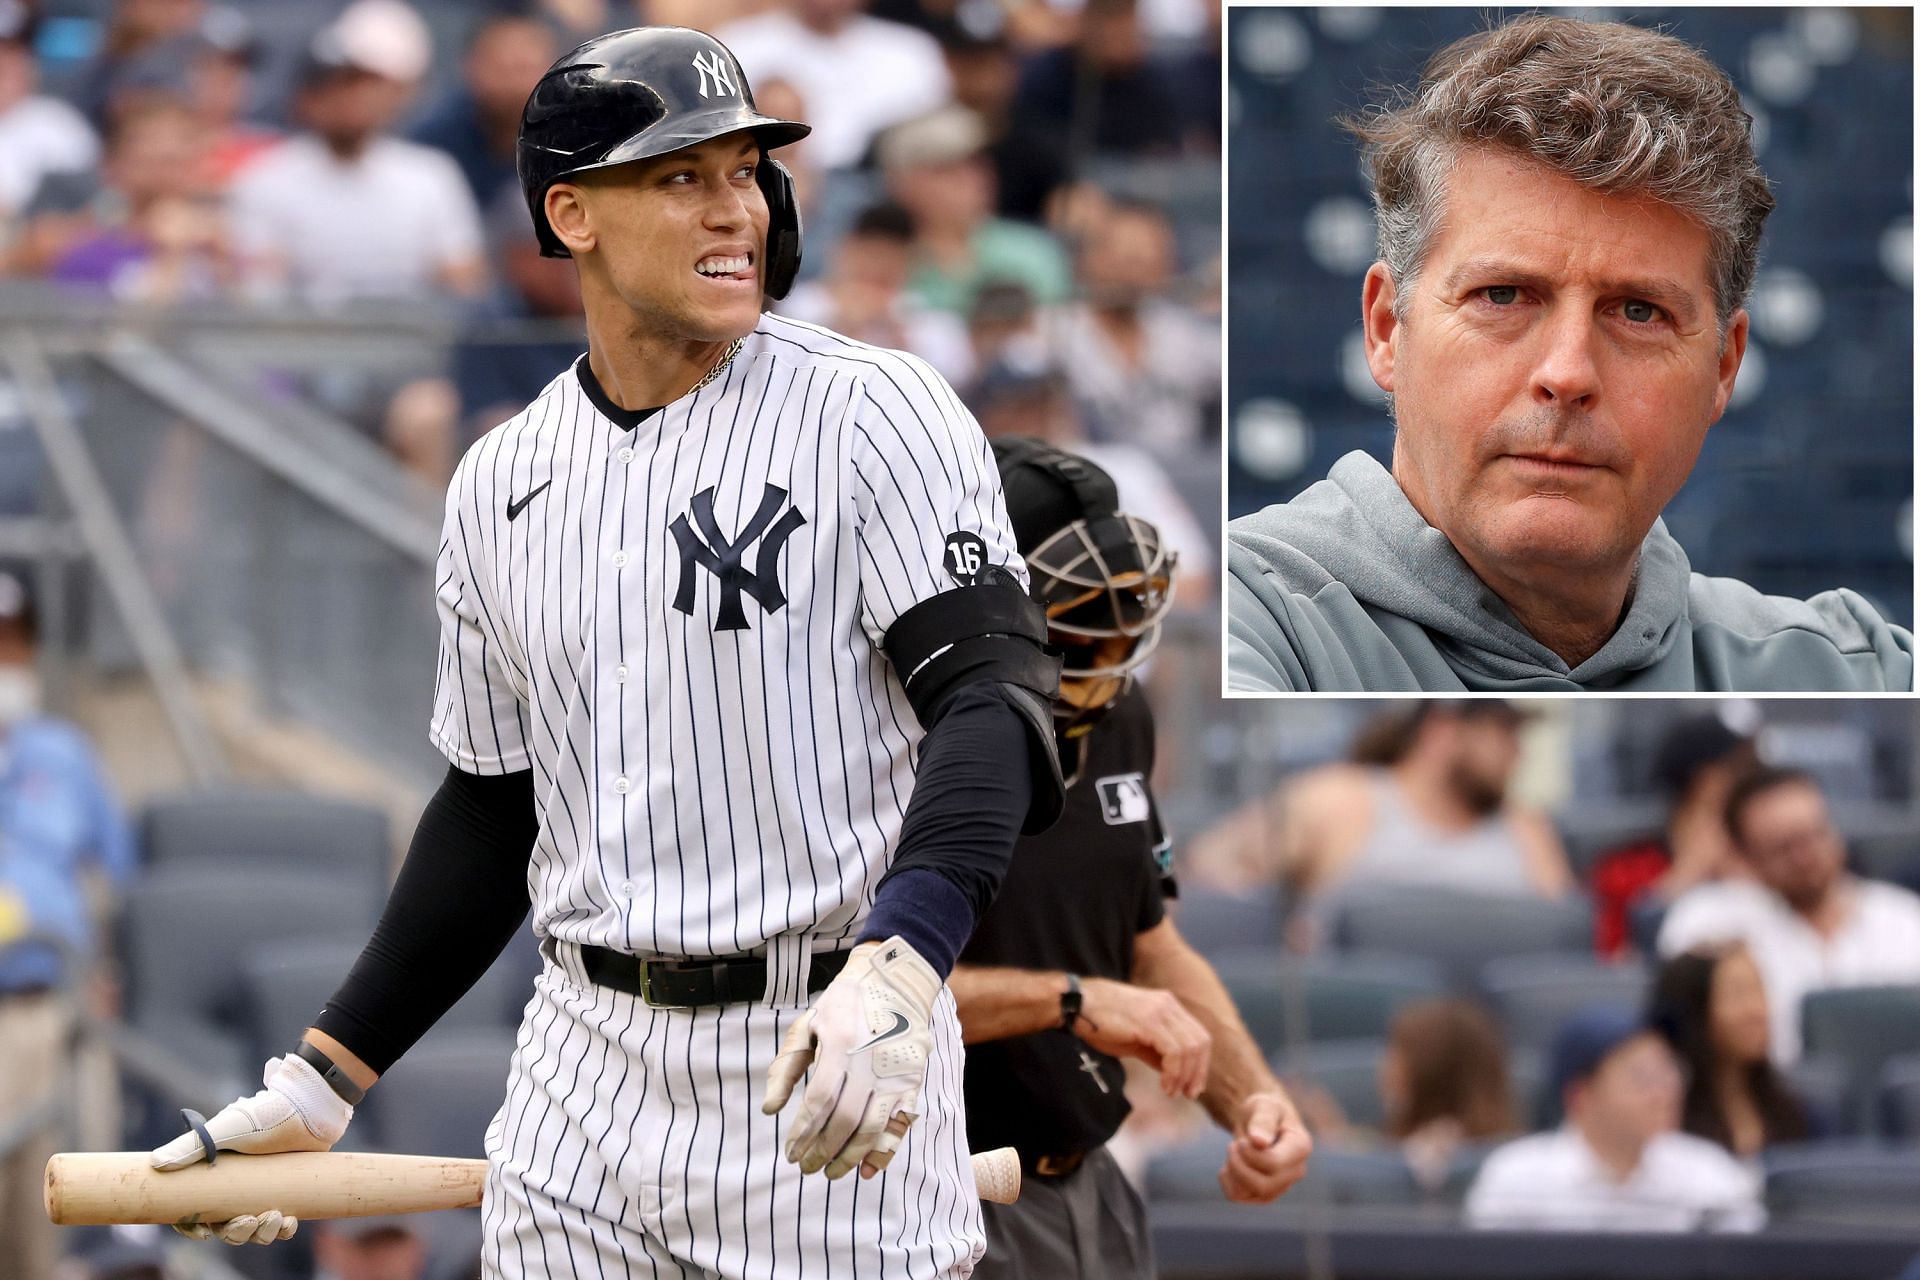 Shohei Ohtani to Yankees? Would Hal Steinbrenner approve